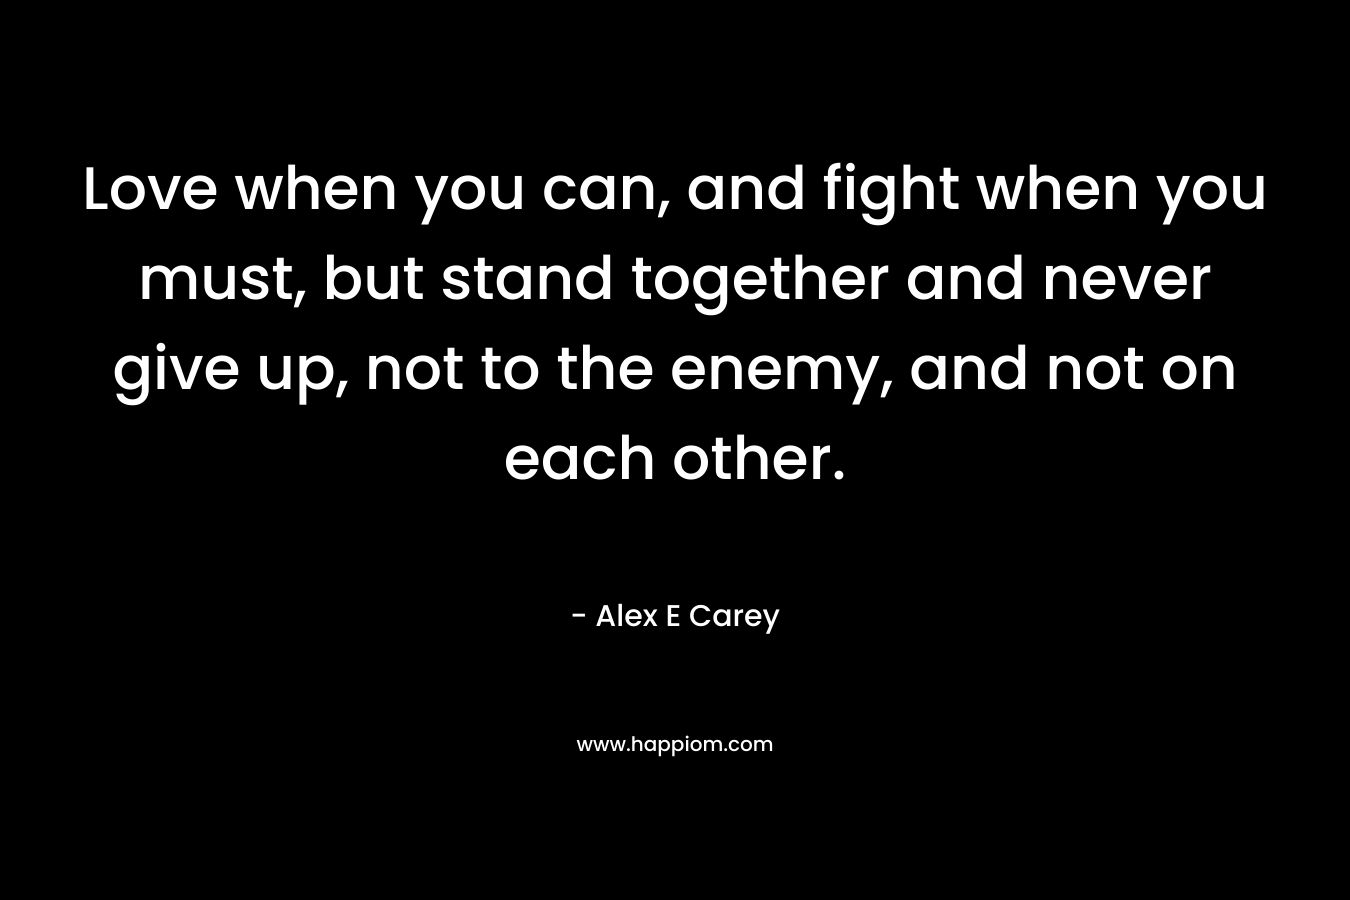 Love when you can, and fight when you must, but stand together and never give up, not to the enemy, and not on each other. – Alex E Carey